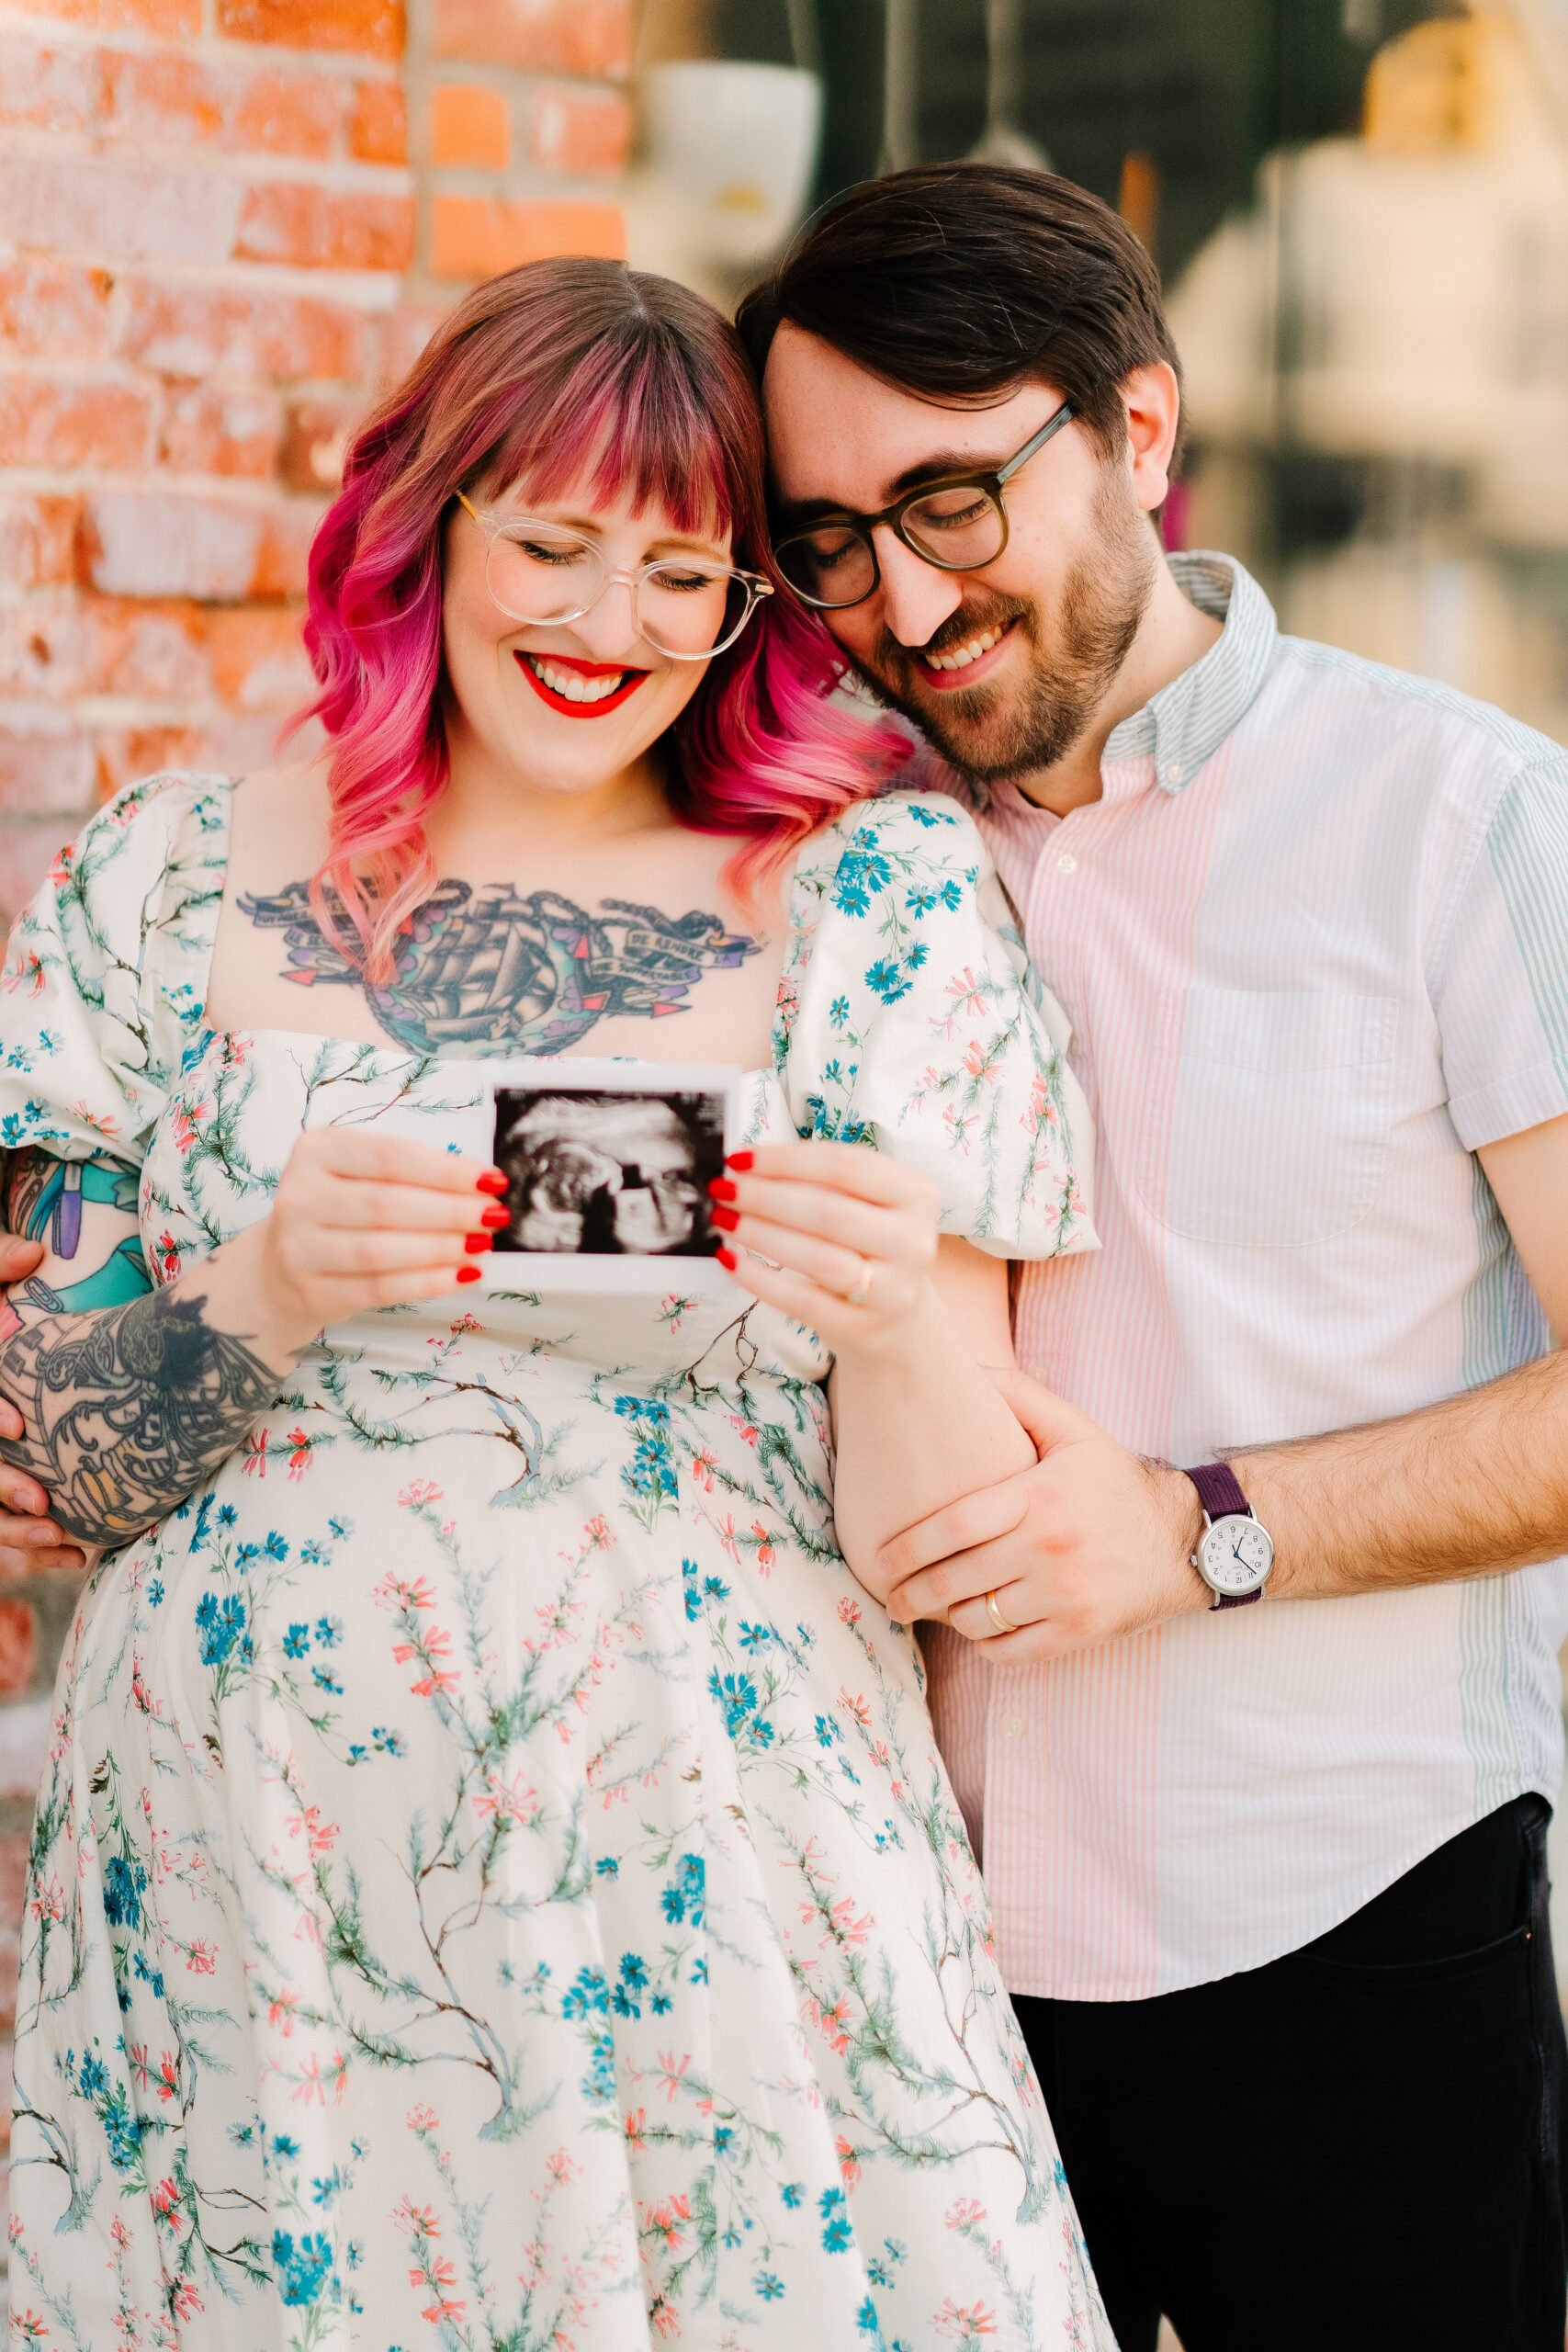 The Crafted Life Pregnancy Announcement by http://abbyrosephoto.com/